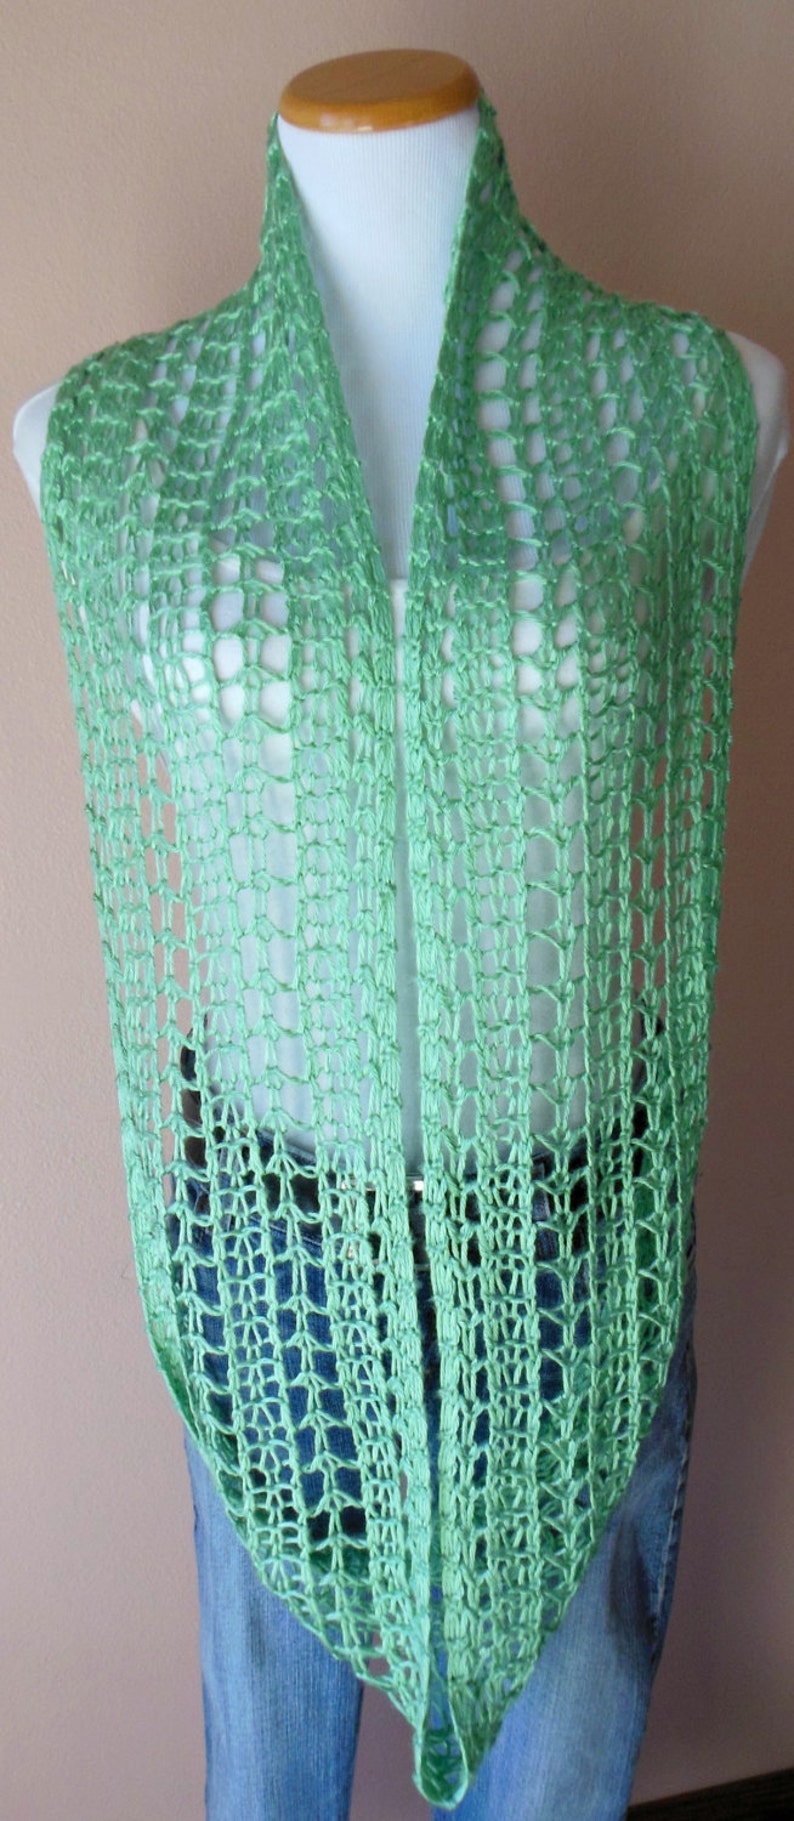 Spearmint Green Infinity Scarf Hand Knit Lacy Open Weave Light Weight Circle Loop Fashion Scarf image 5